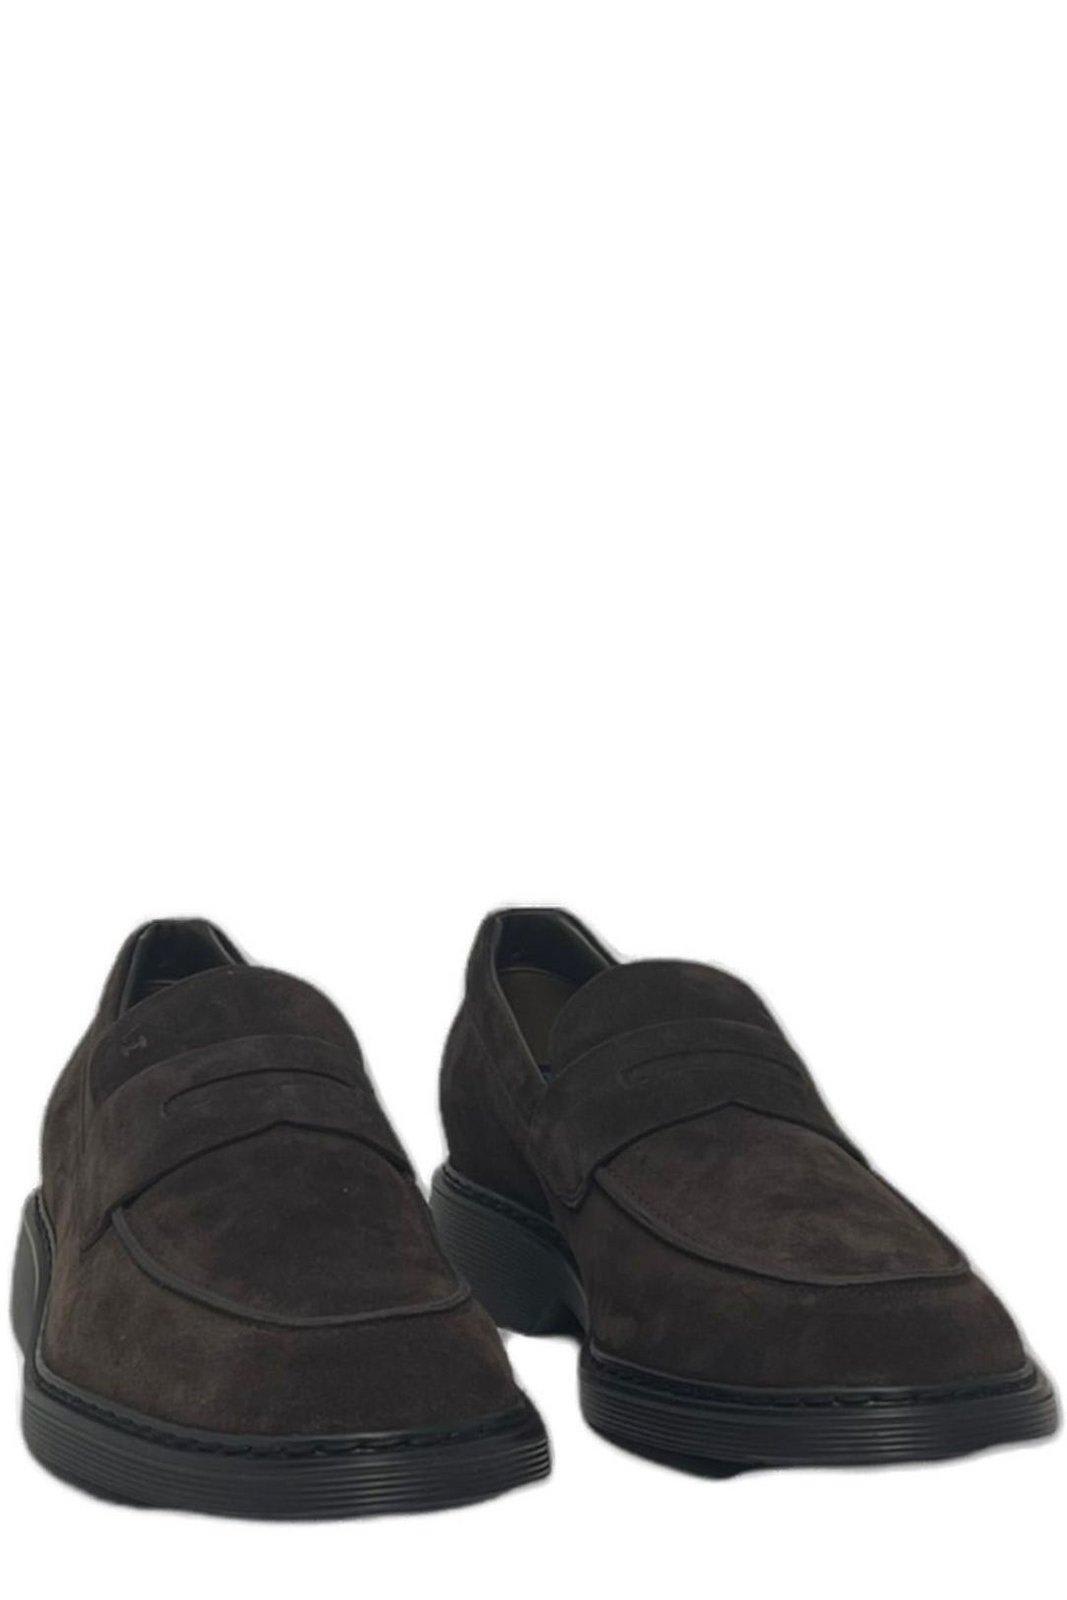 Shop Hogan Mocassino Almond-toe Loafers In Brown